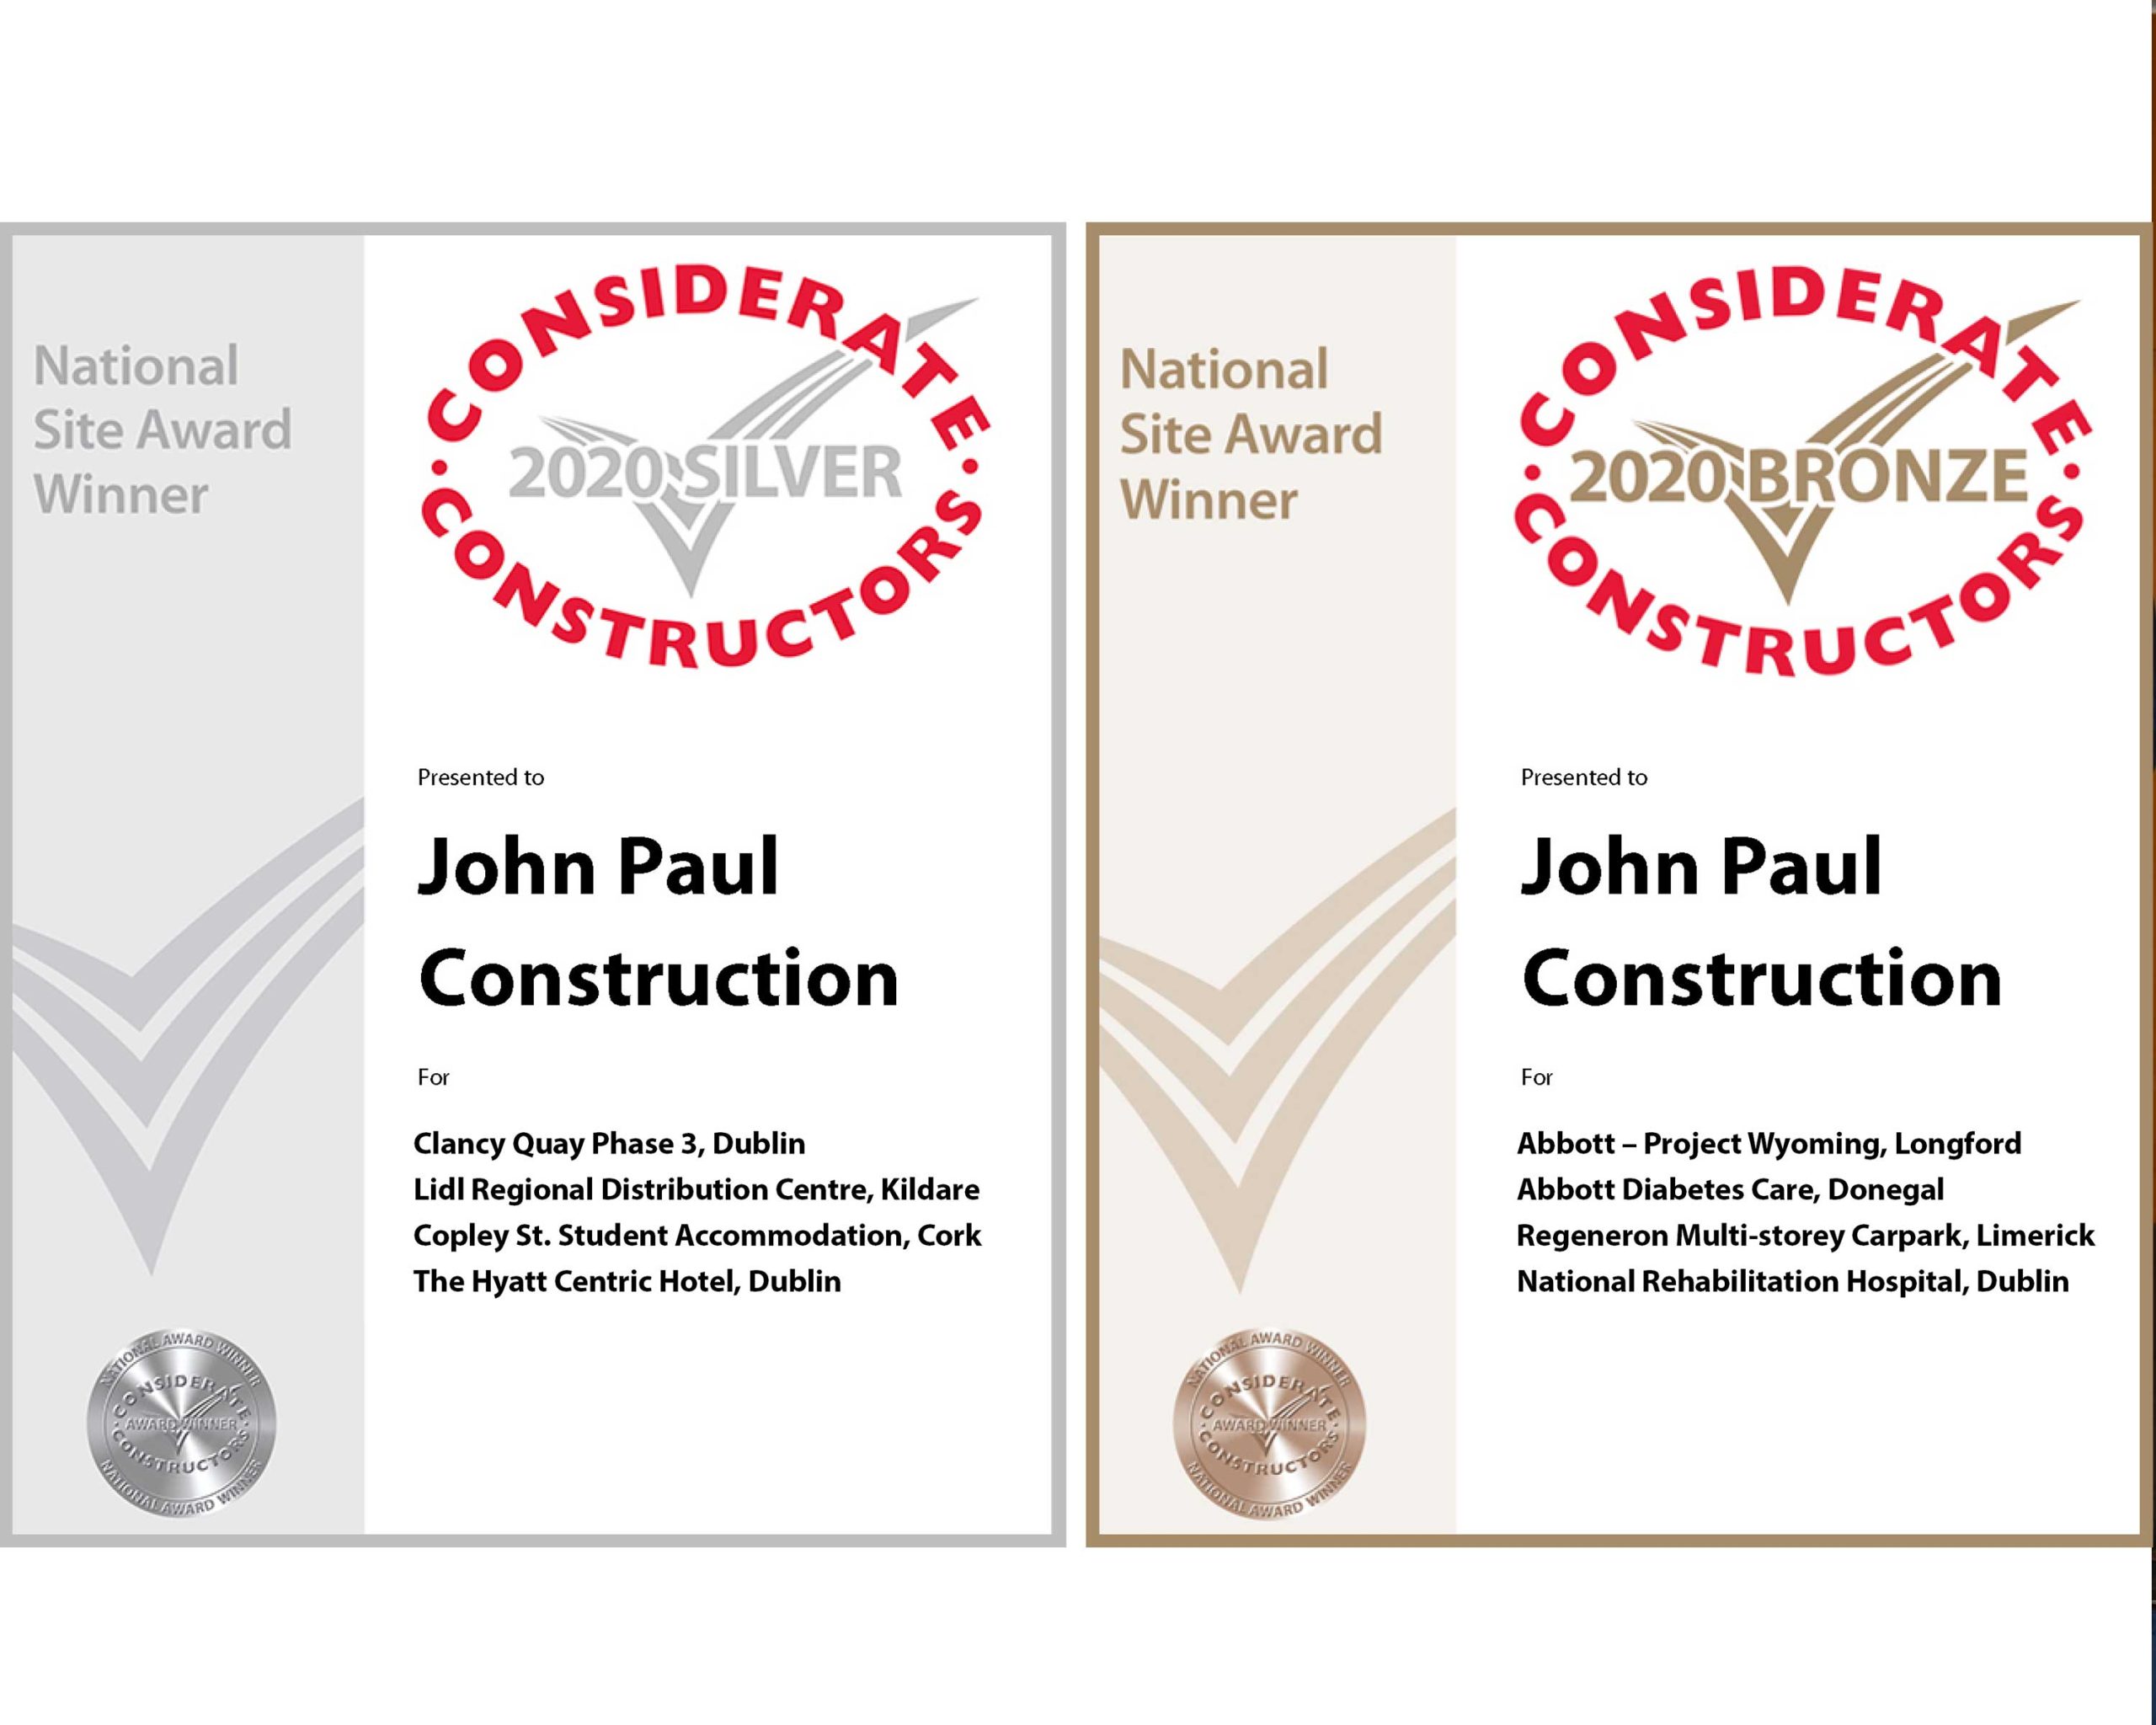 2020 Considerate Constructors National Site Awards